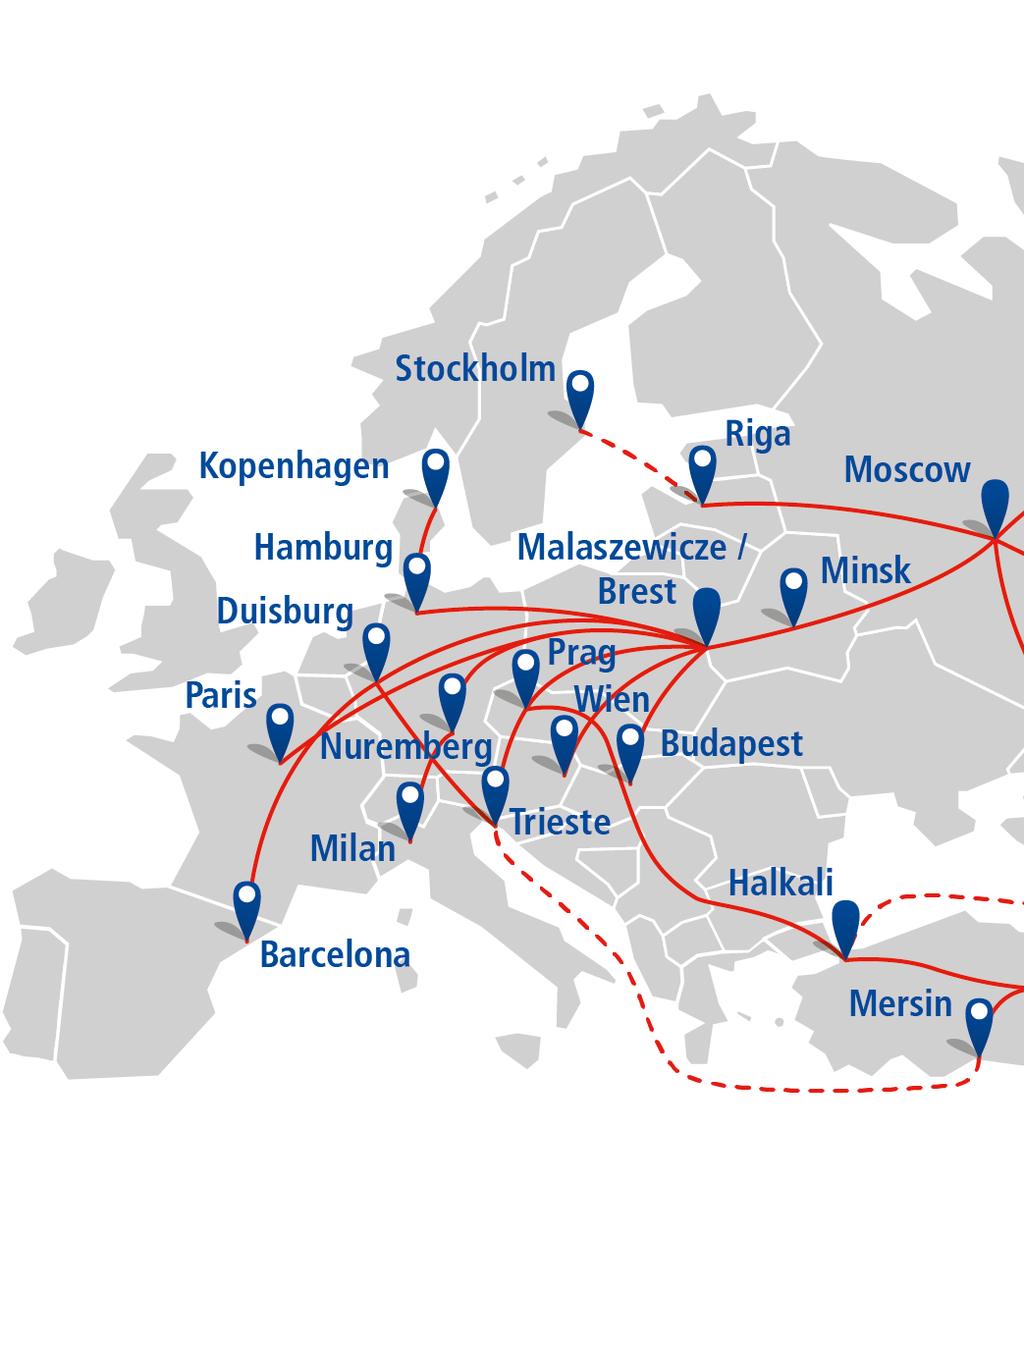 Transit Times Europe - China Route Europe to North China Terminalto-Terminal Door-to- Door 20 days 22-25 days Europe to East